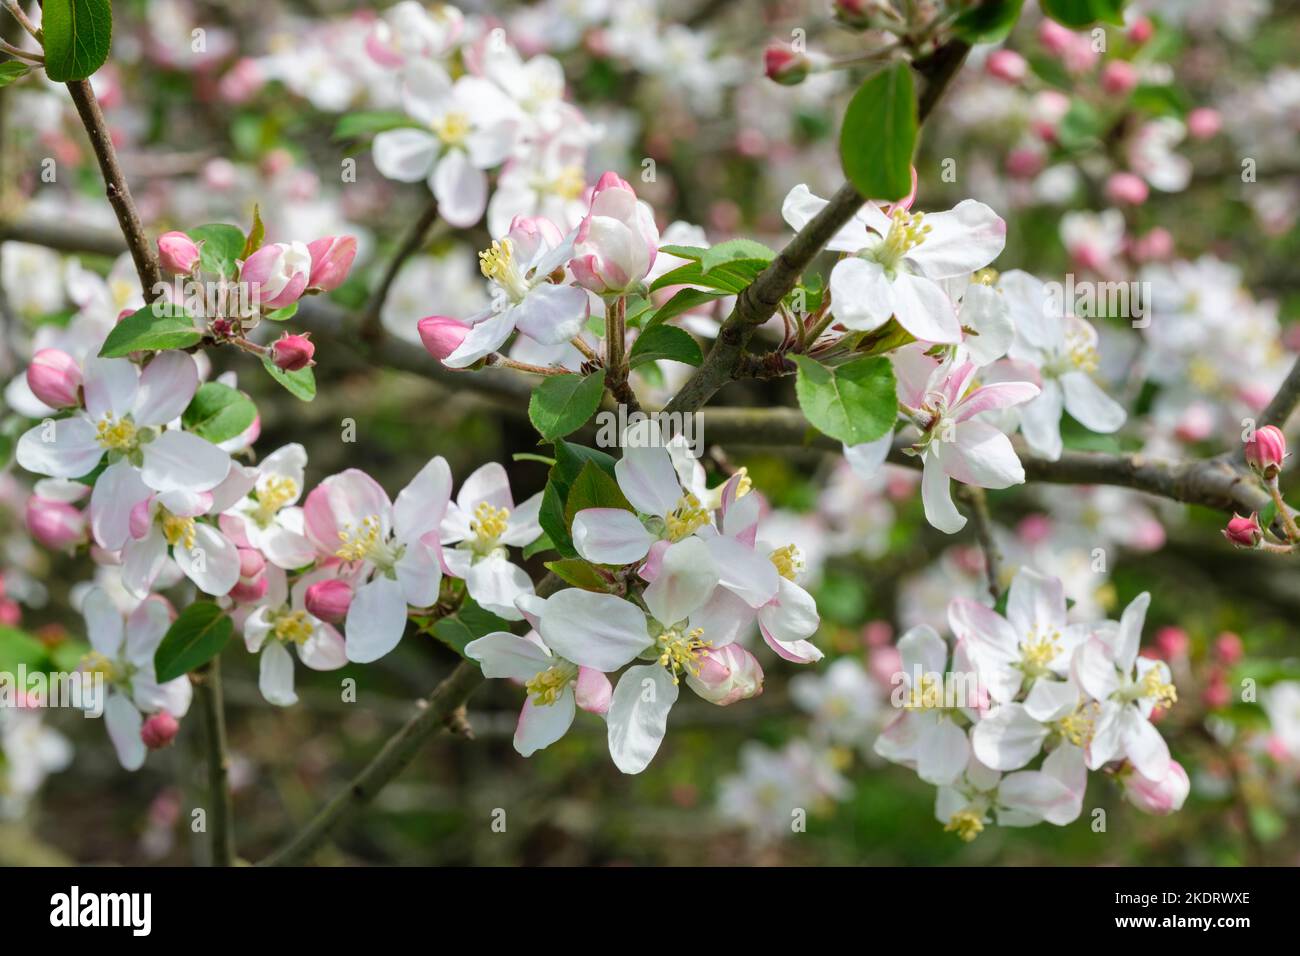 Malus sylvestris, crab apple, European crab apple, wild crab, Malus acerba, Pyrus acerba, Pyrus malus clusters of pink-tinged white flowers Stock Photo